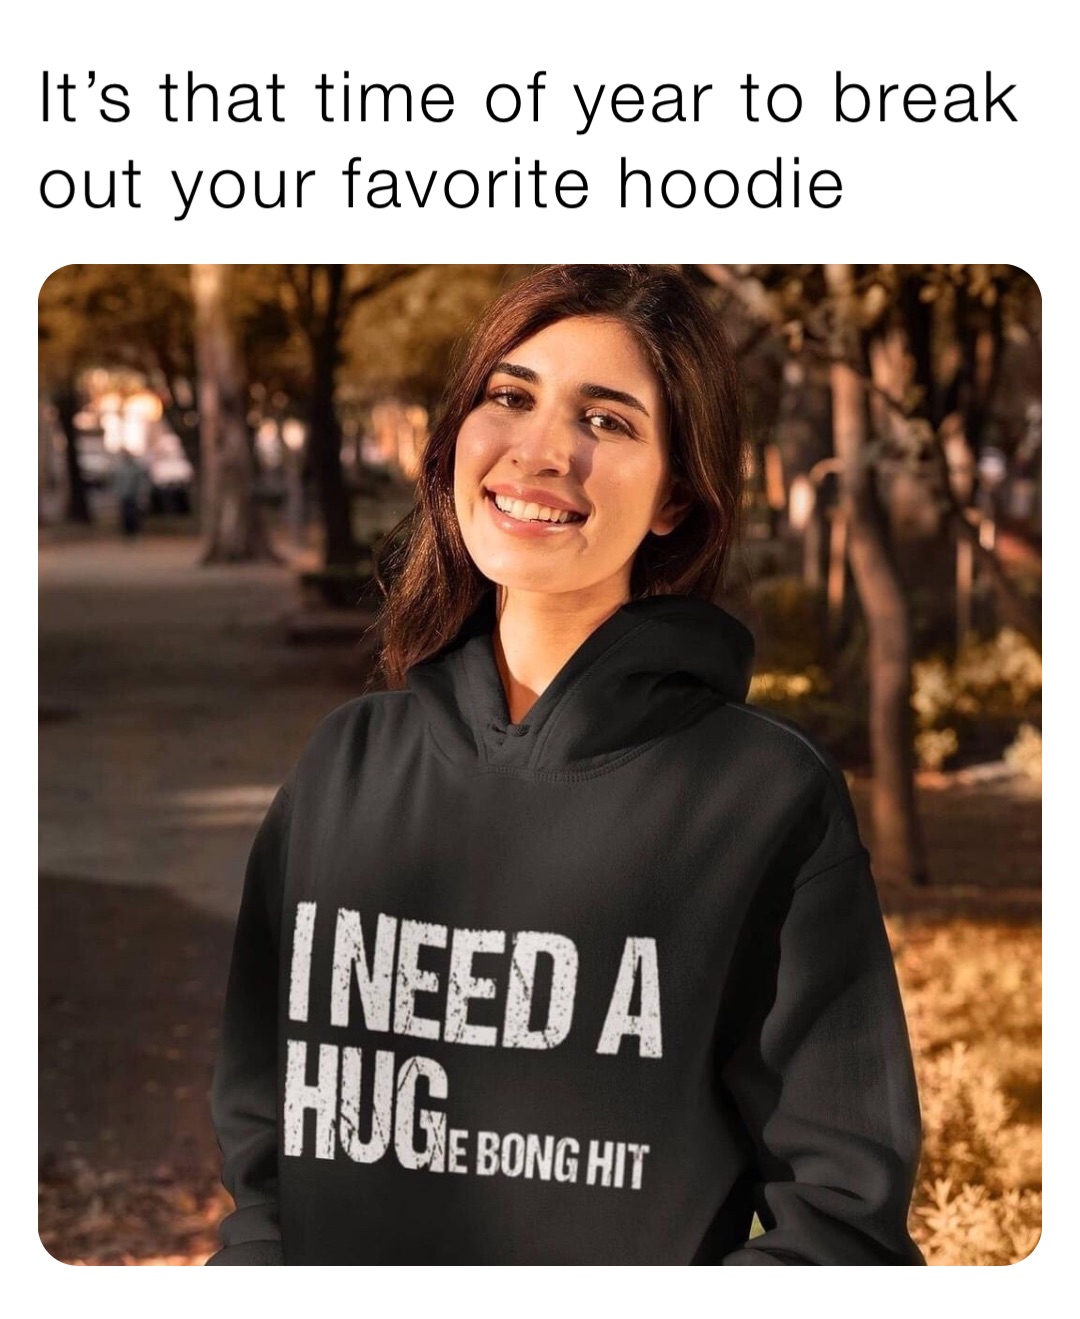 It’s that time of year to break out your favorite hoodie